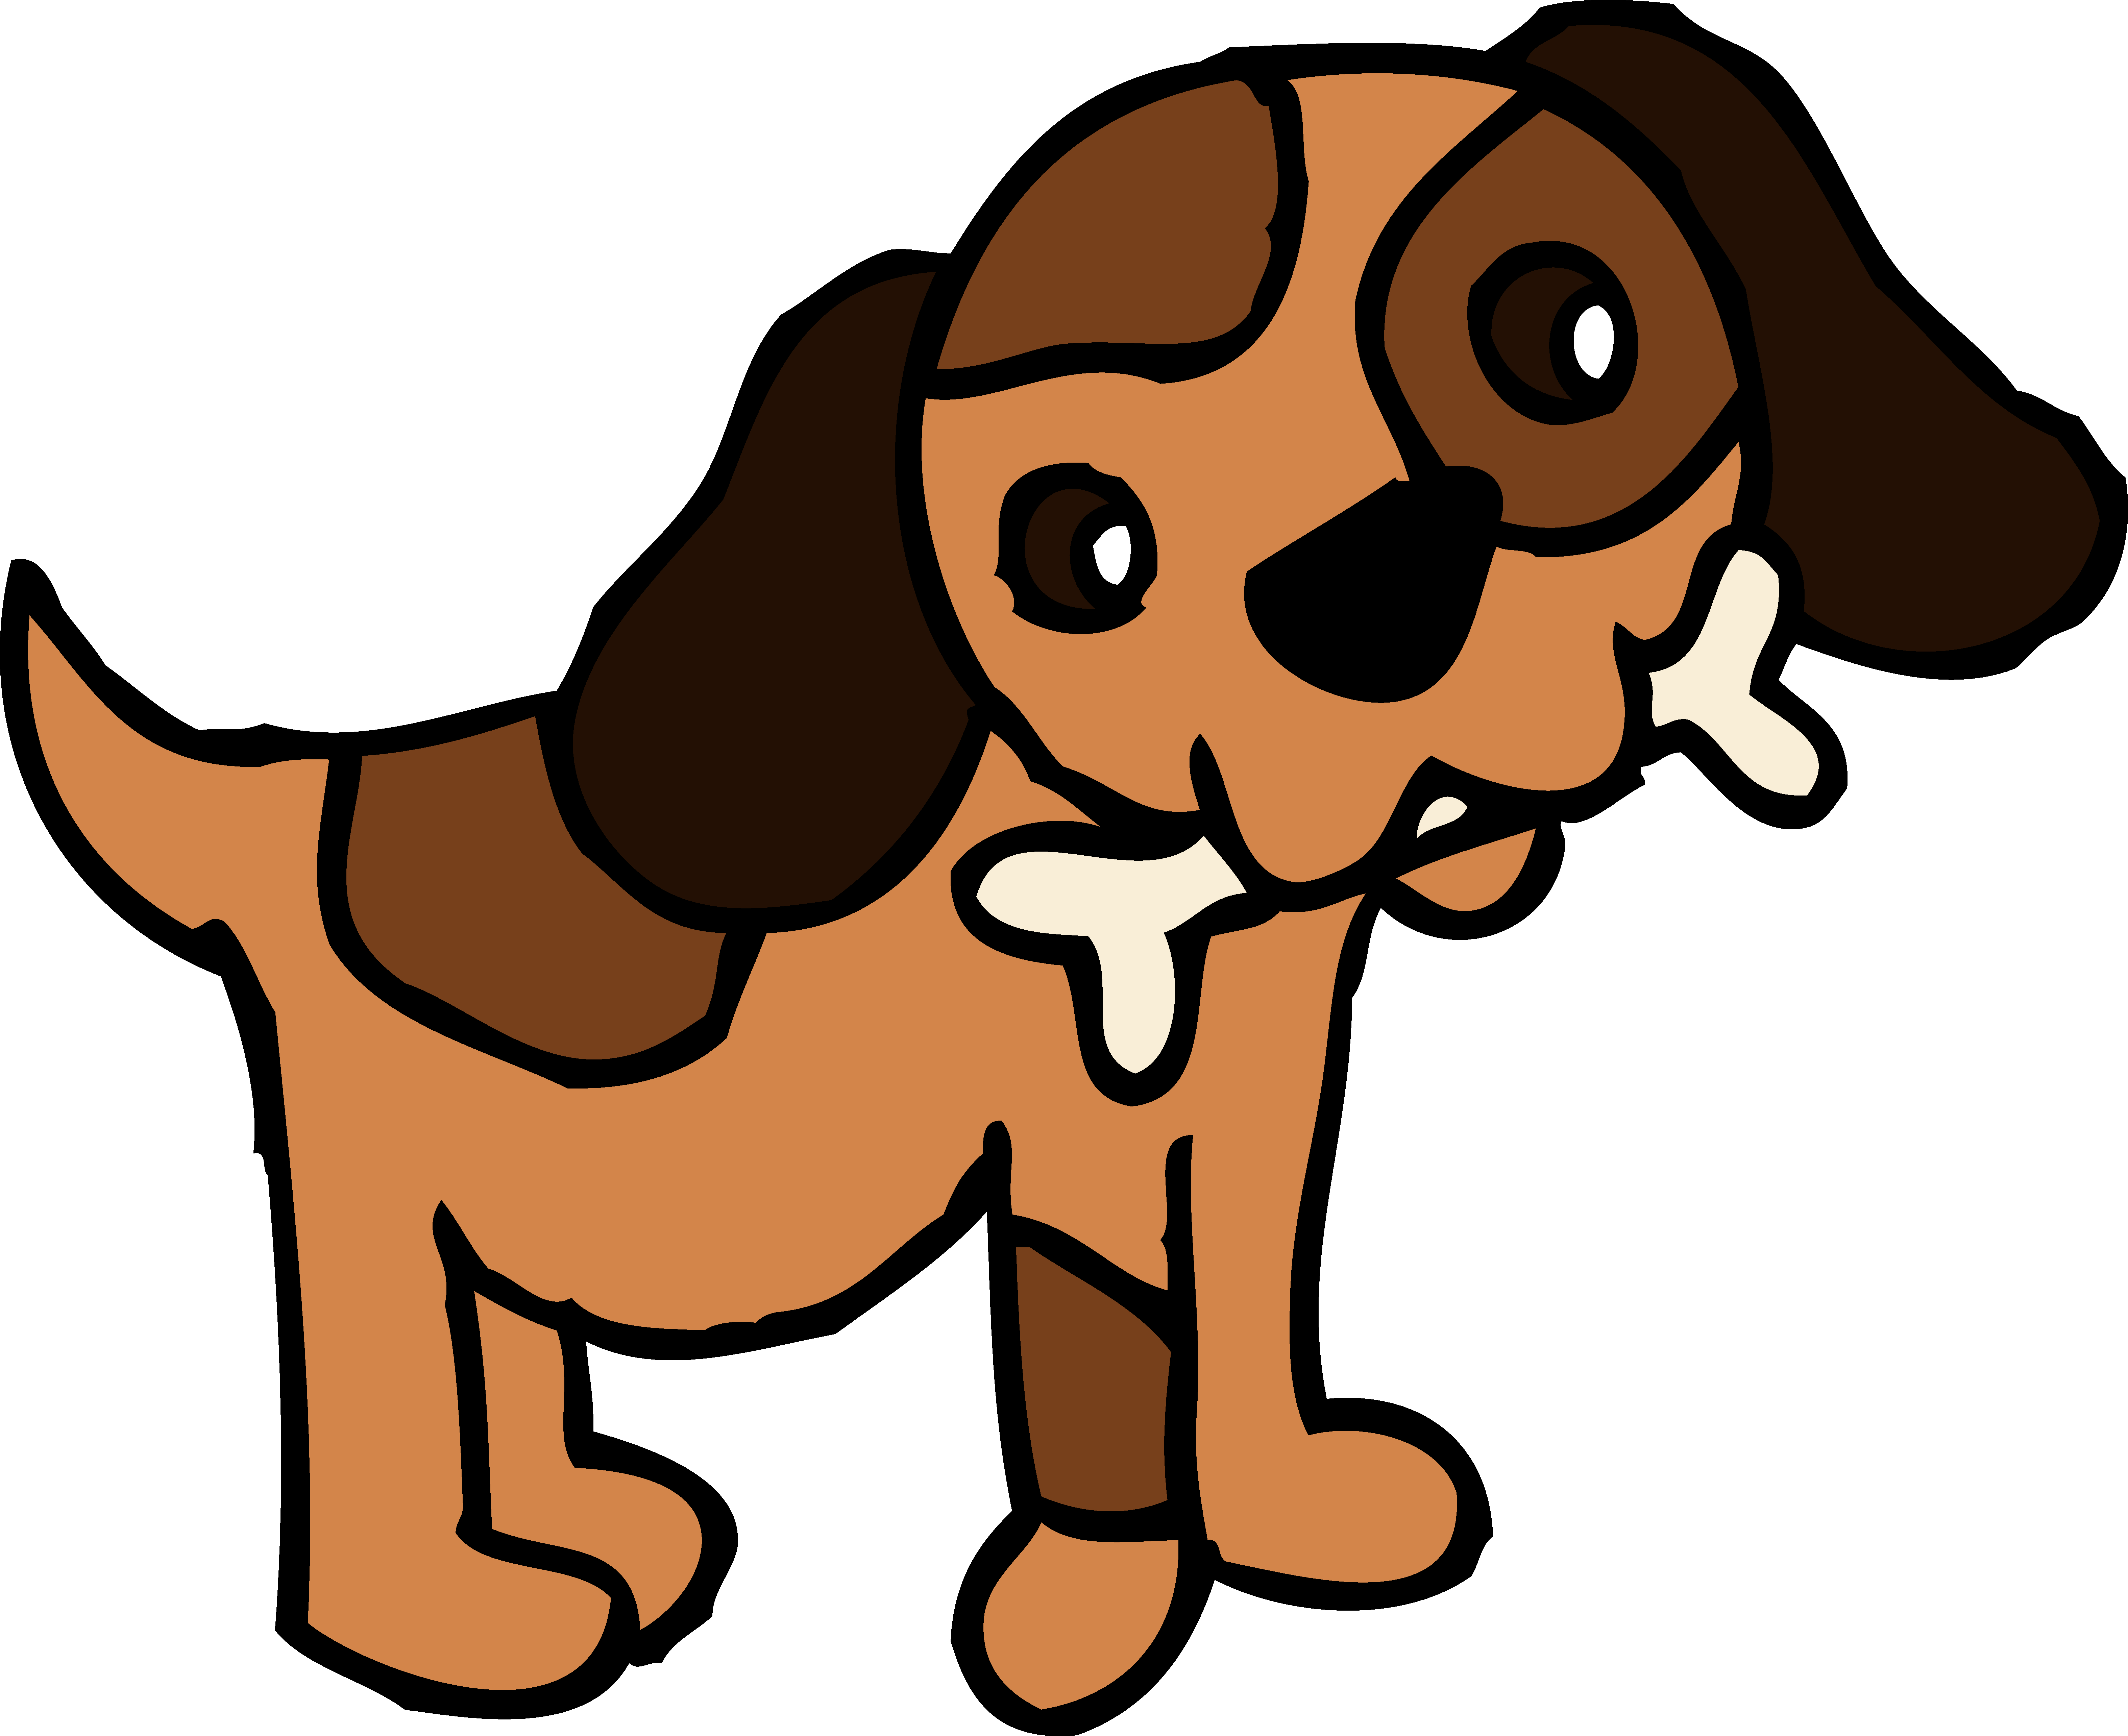 Image of Brown and White Dog